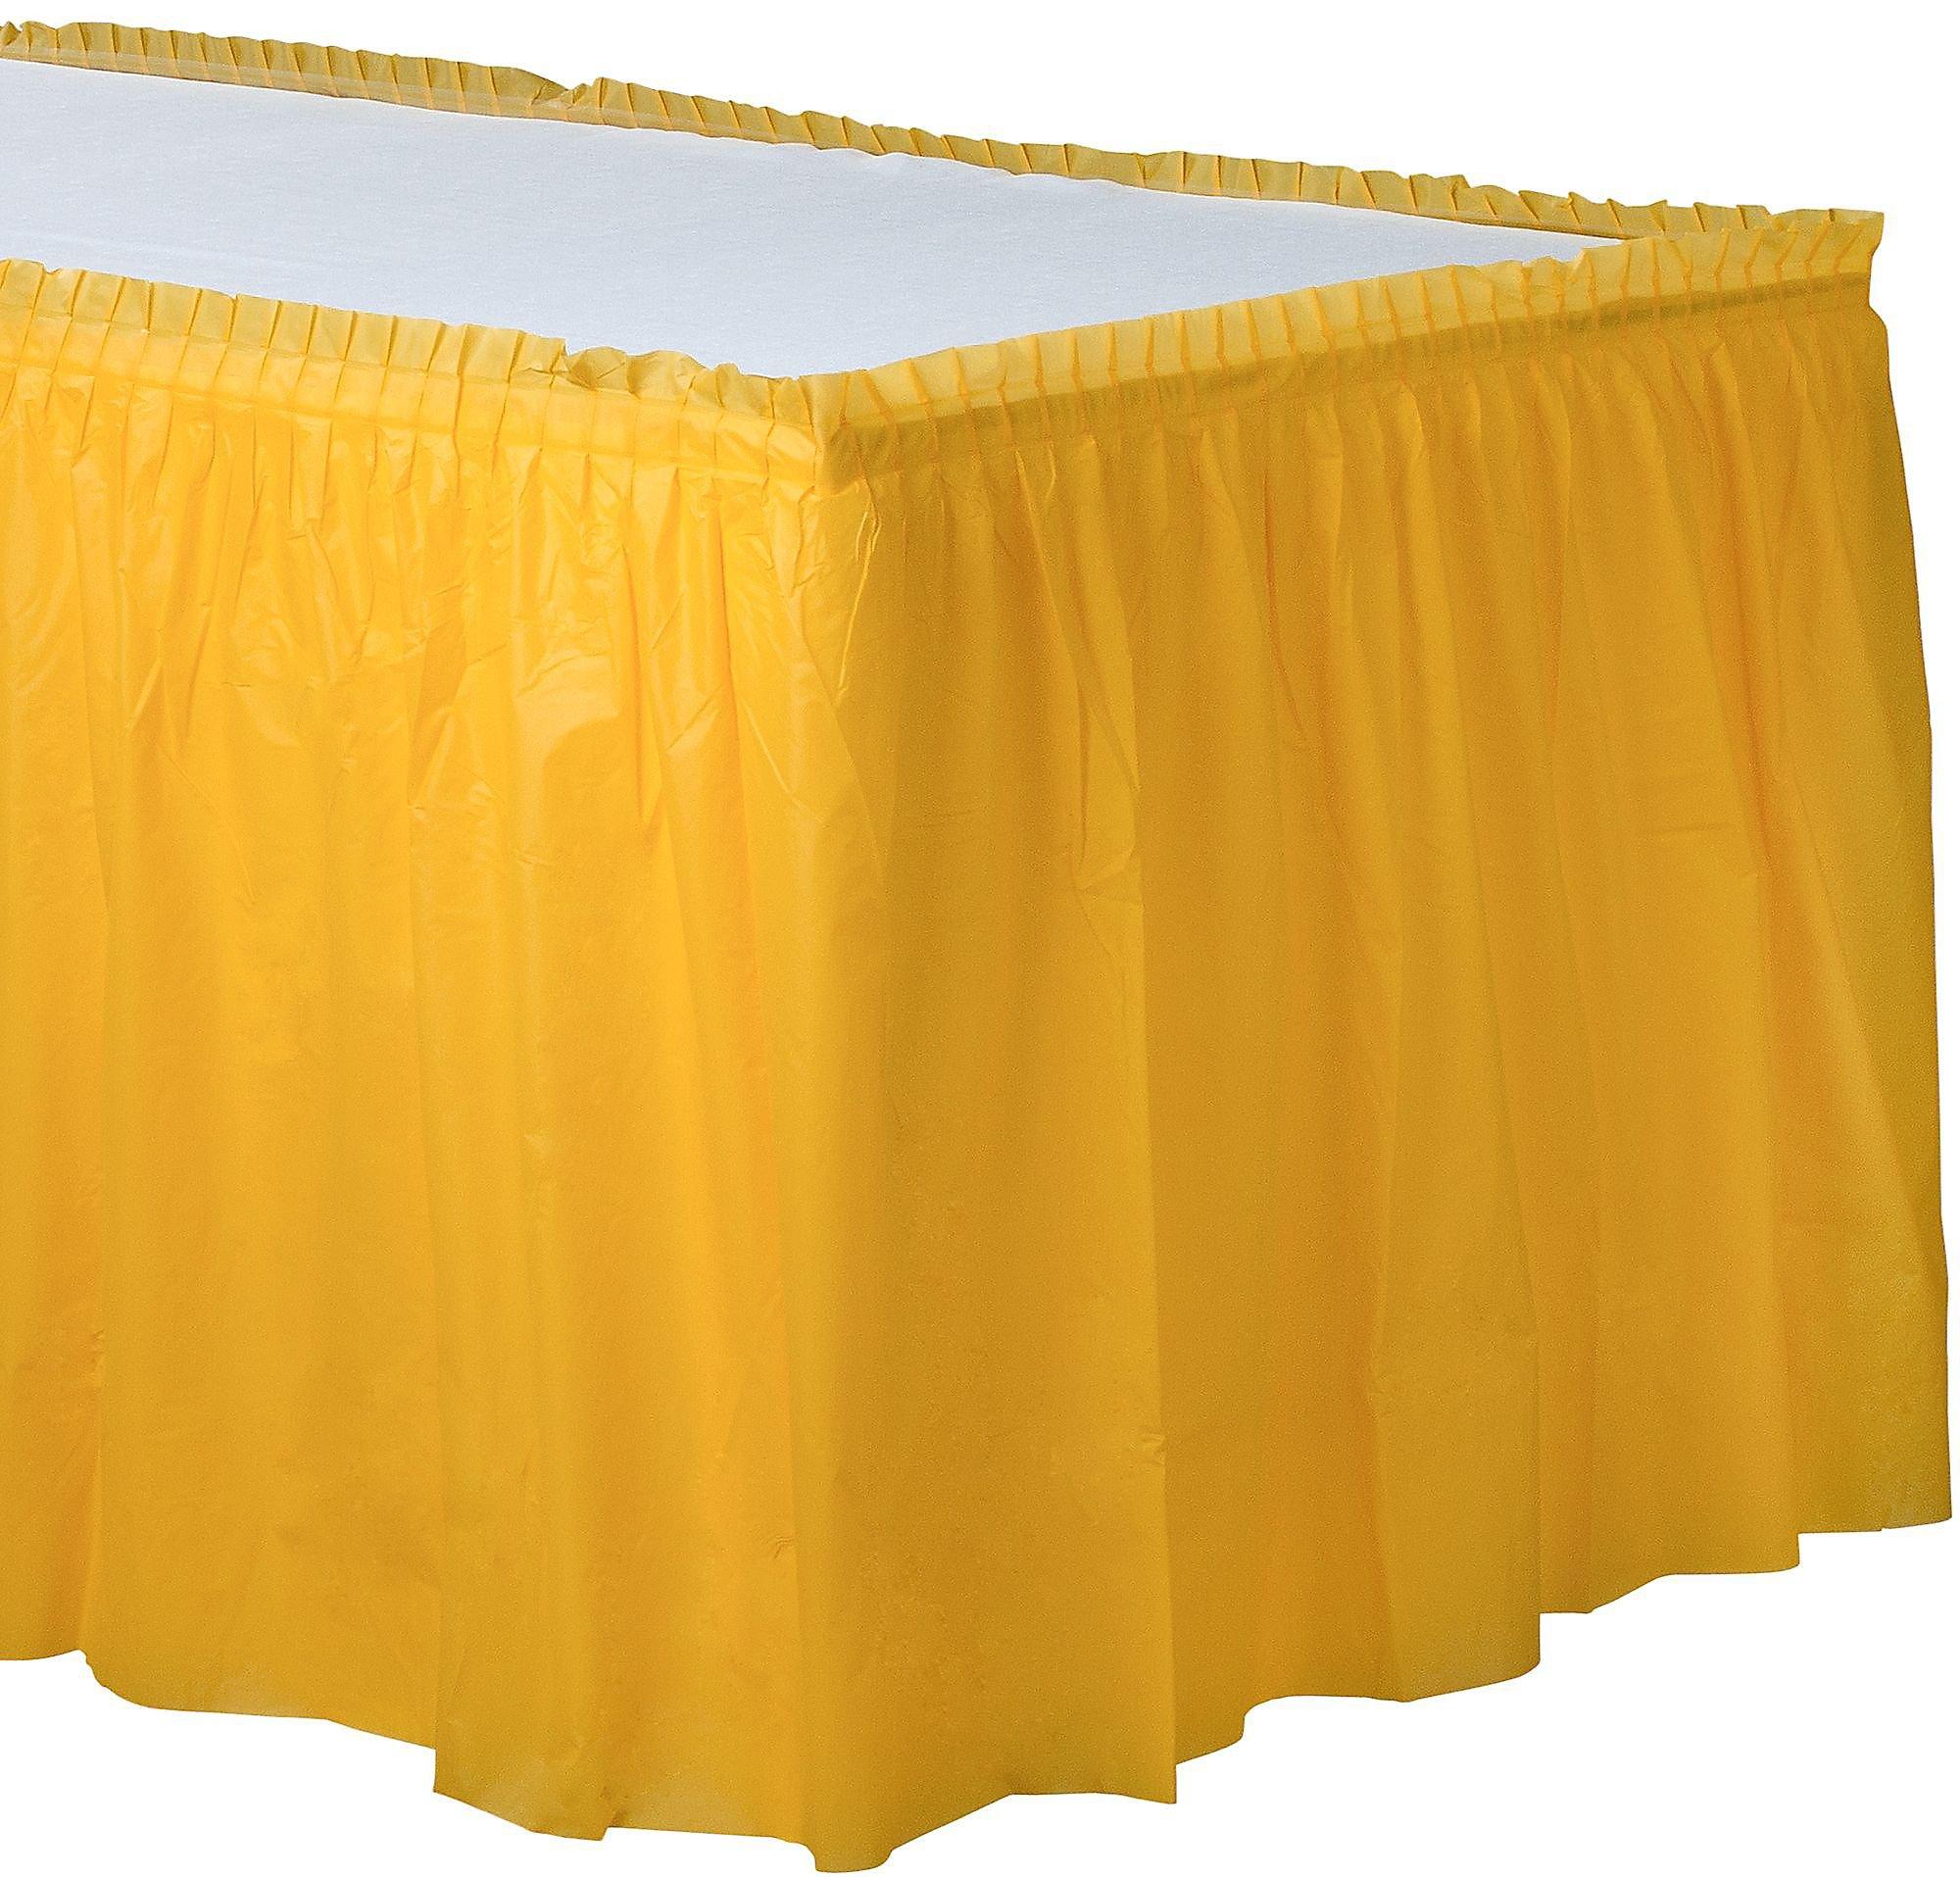 Yellow Plastic Table Skirt, 21ft x 29in